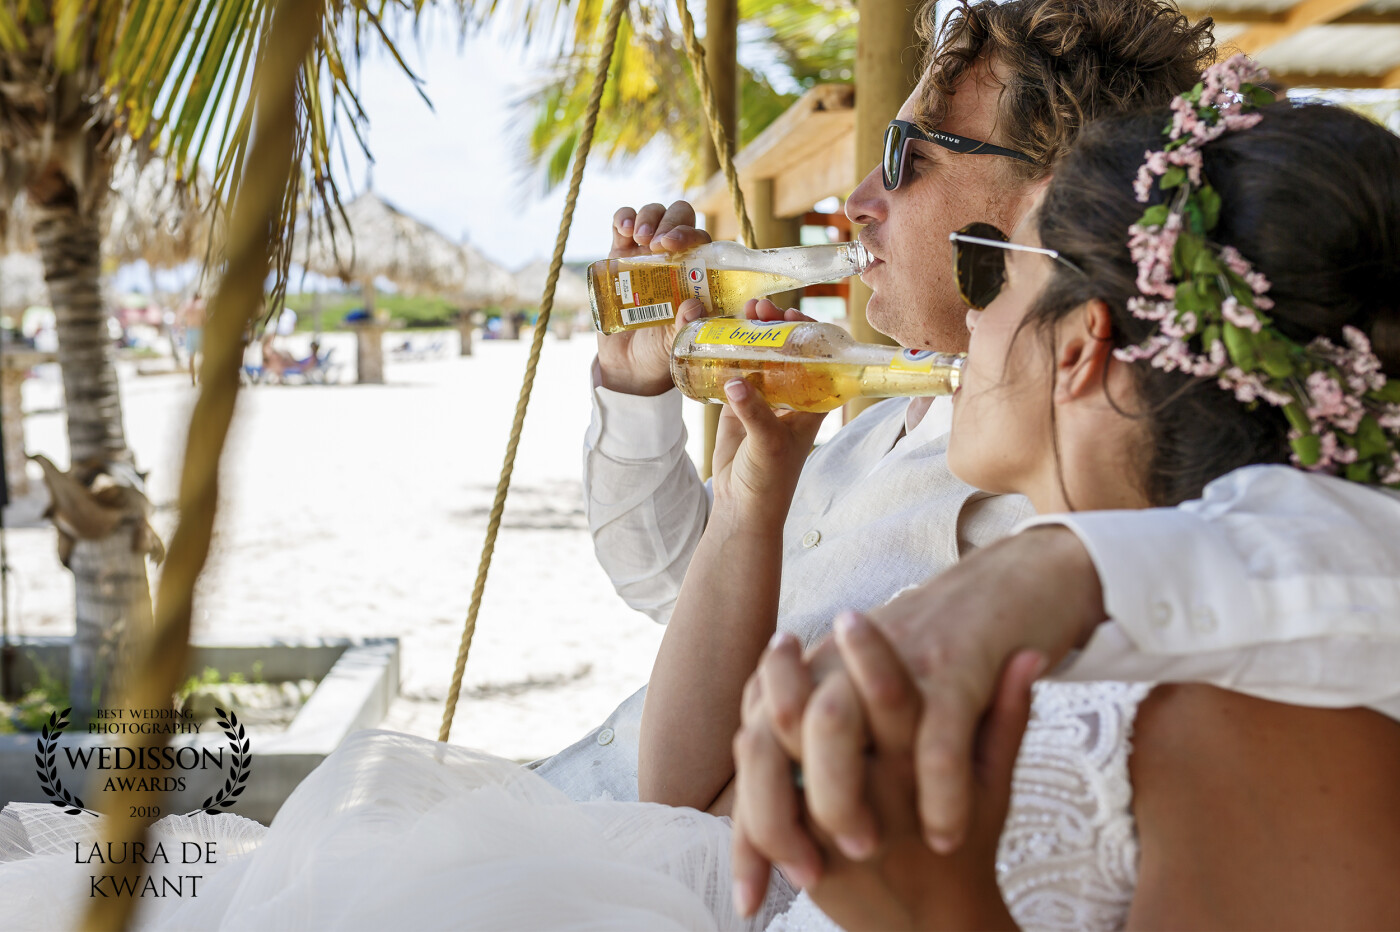 After the photoshoot, it was time for a cold beer on the beach of Aruba! <br />
This lovely couple is real beach people so this was a perfect spot to take pictures.